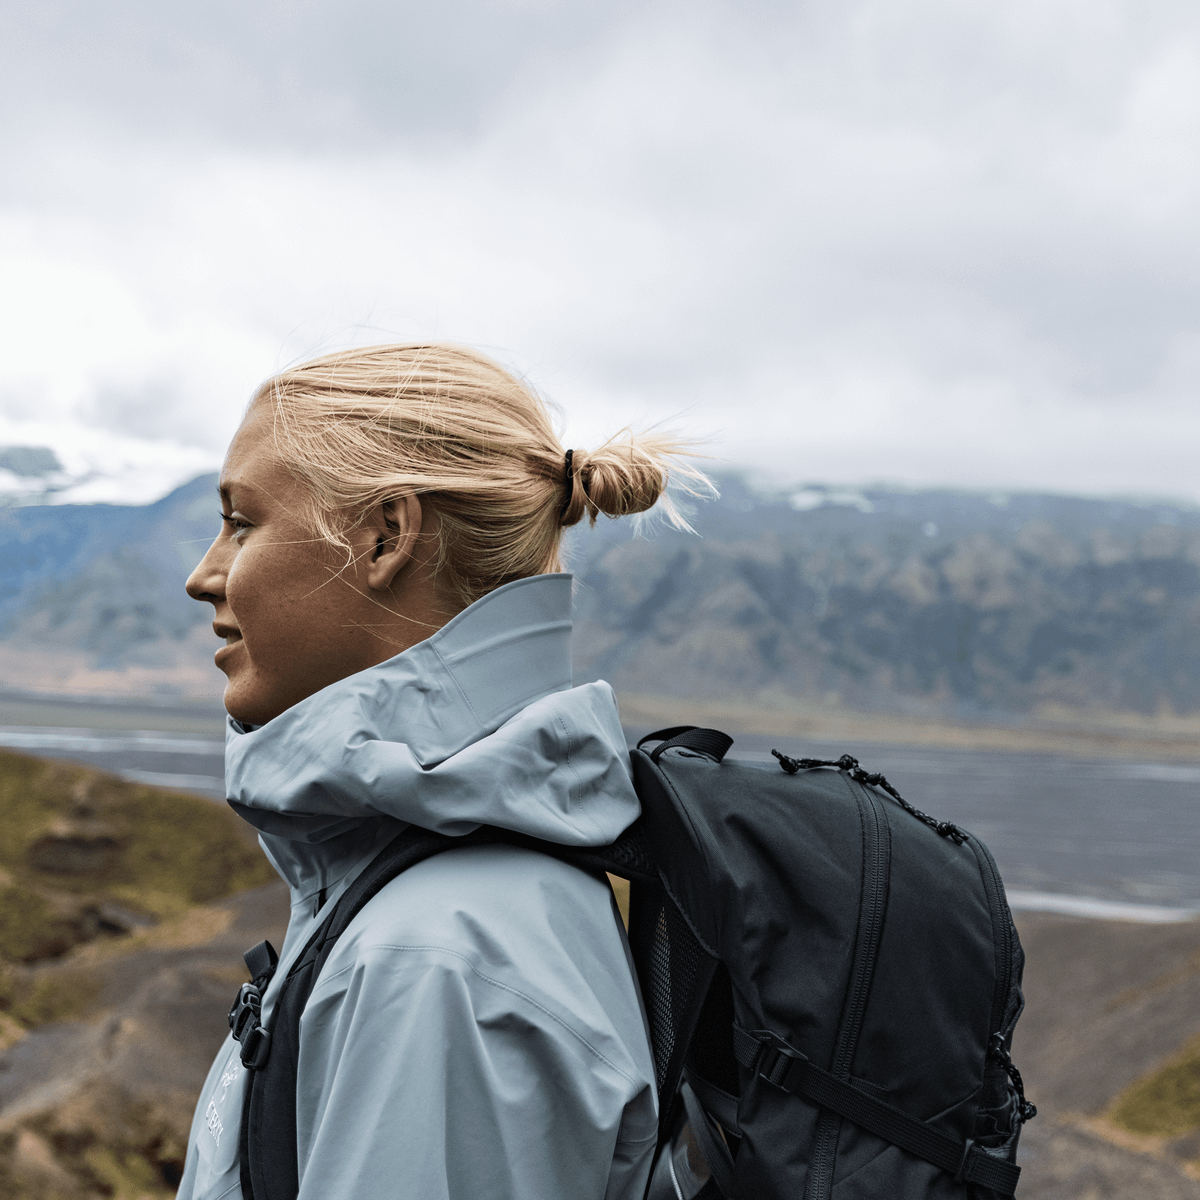 A hiker walks on a cloudy day on a mountain path carrying aThule Nanum 25L  hiking backpack.